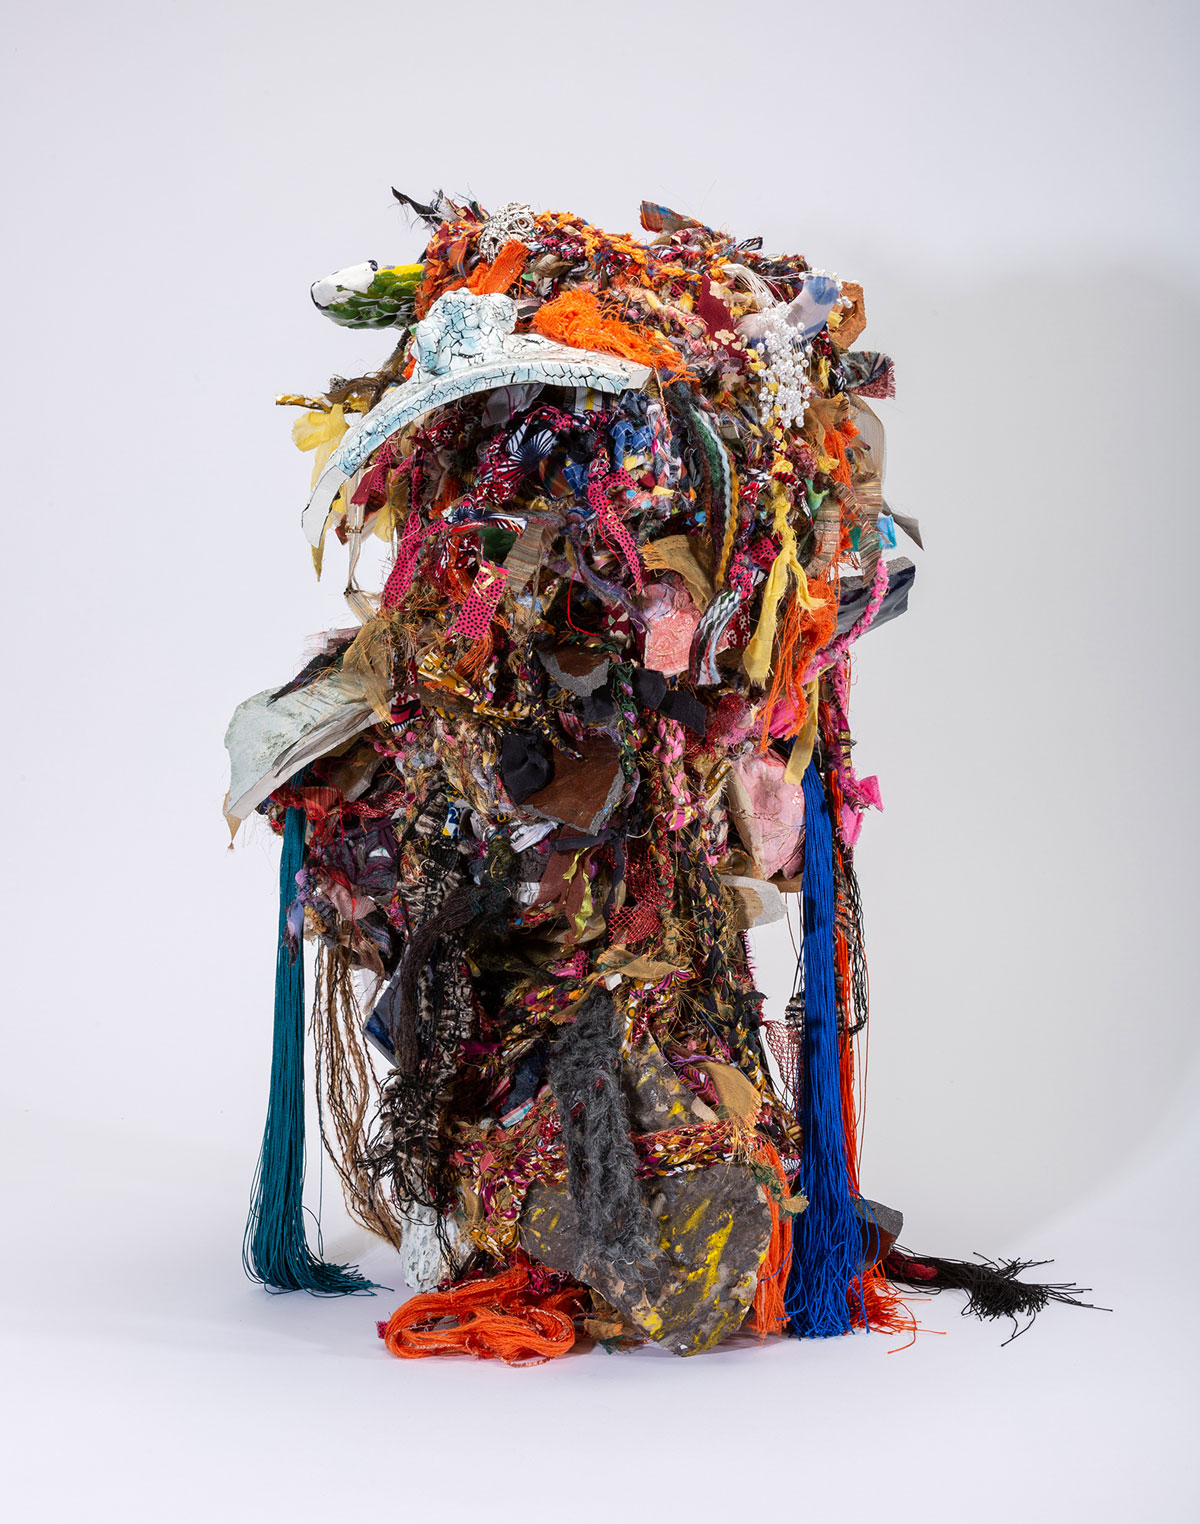 Sculpture that looks like a tangle of multicolored fabric strips